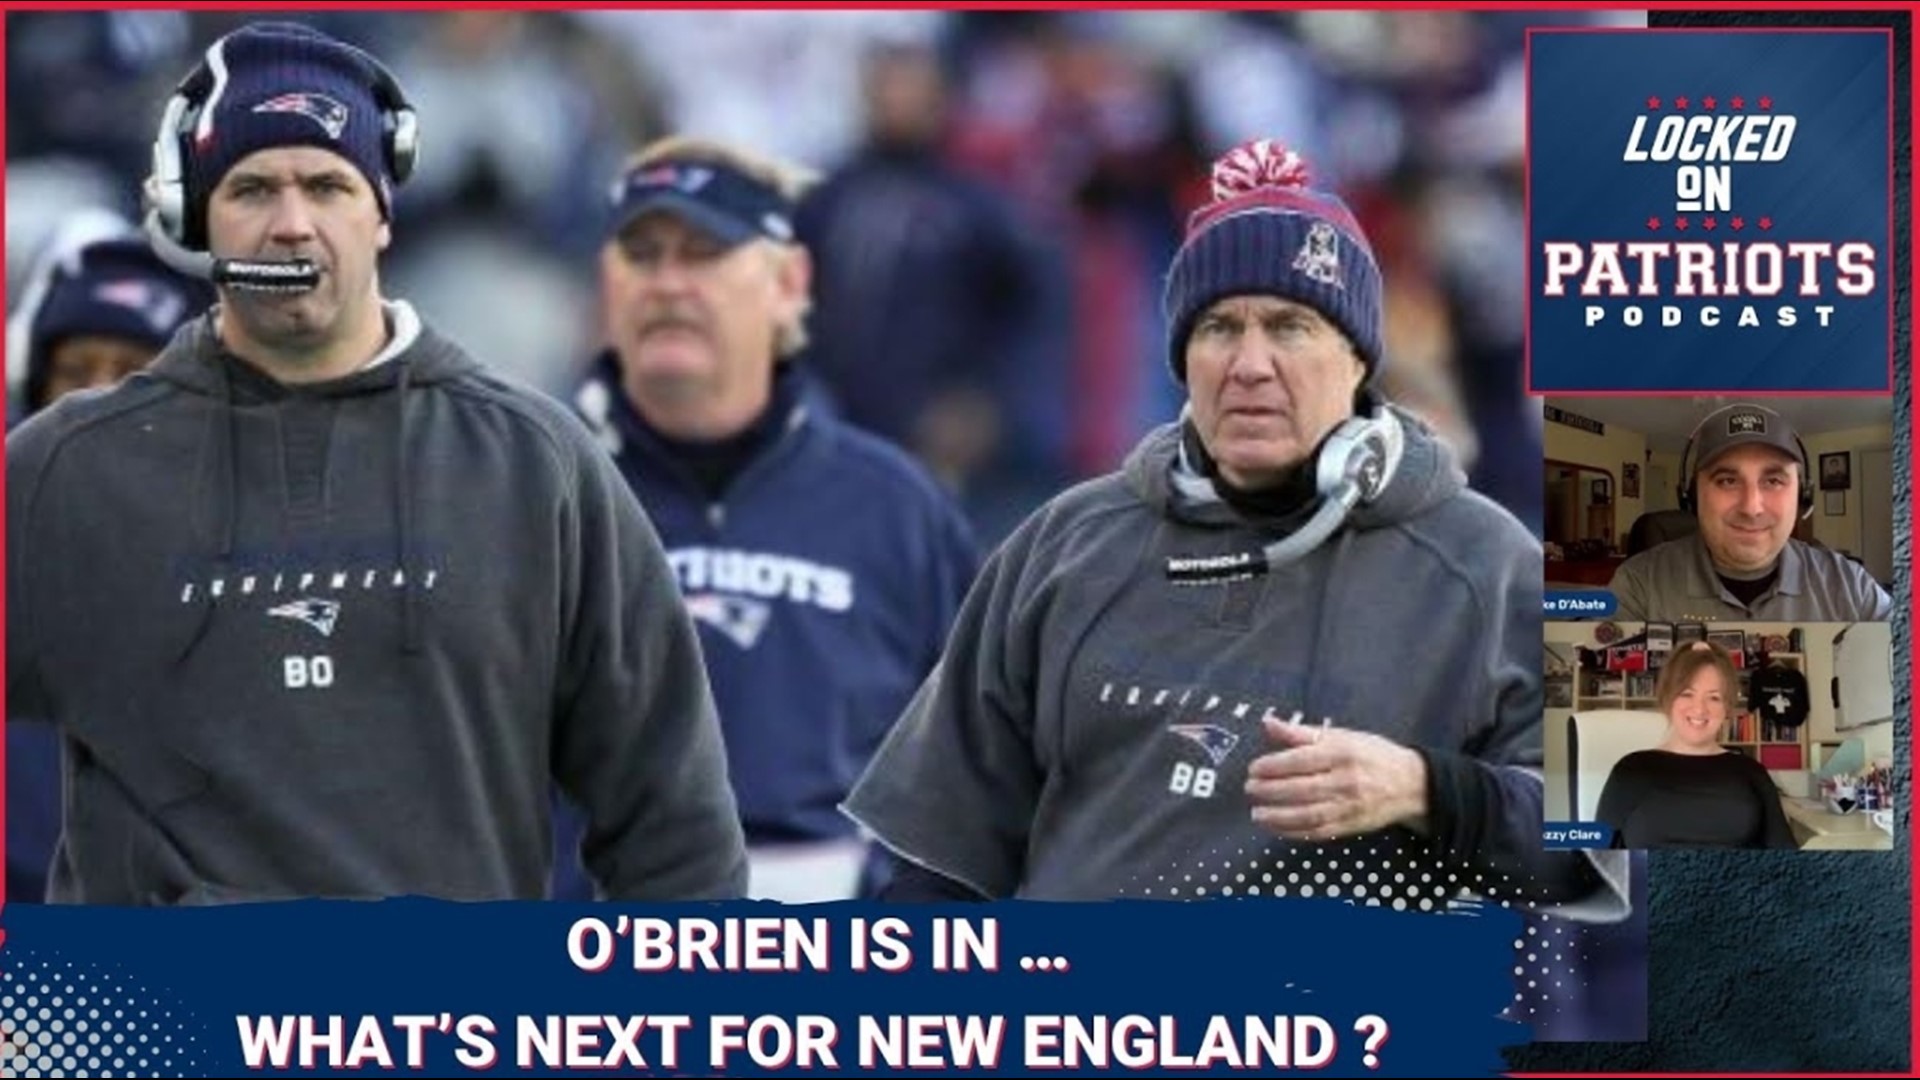 The New England Patriots have their new offensive coordinator with Bill O’Brien back in the fold. However, who stands to benefit most from O’Brien’s hiring?